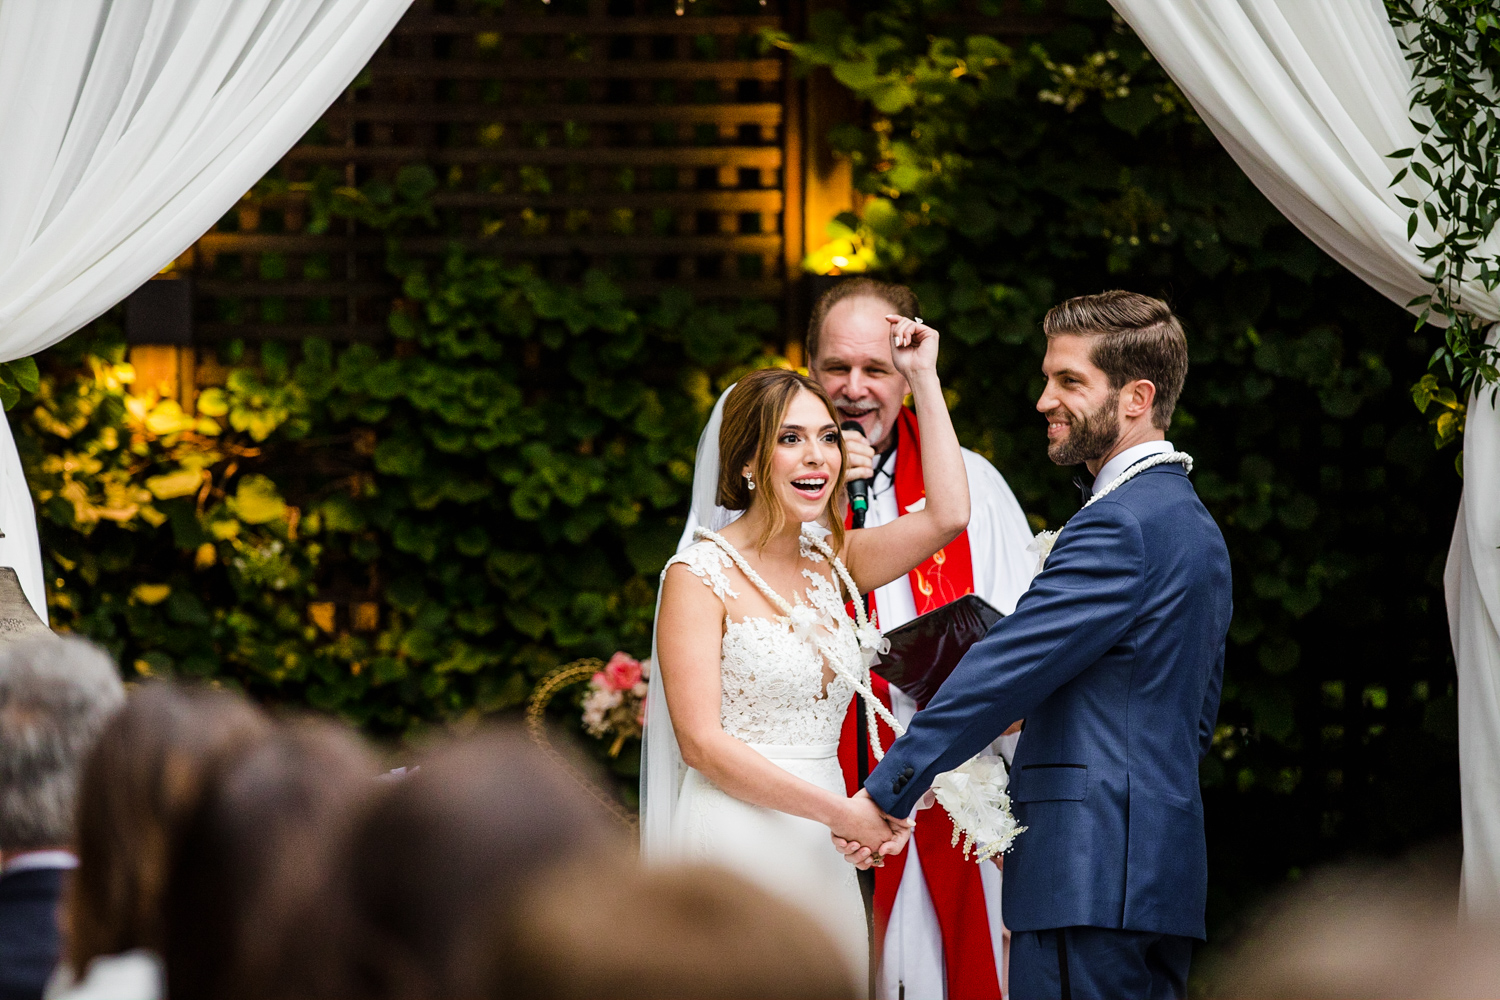 A bride and groom laugh together during their Gallery Marchetti wedding ceremony.